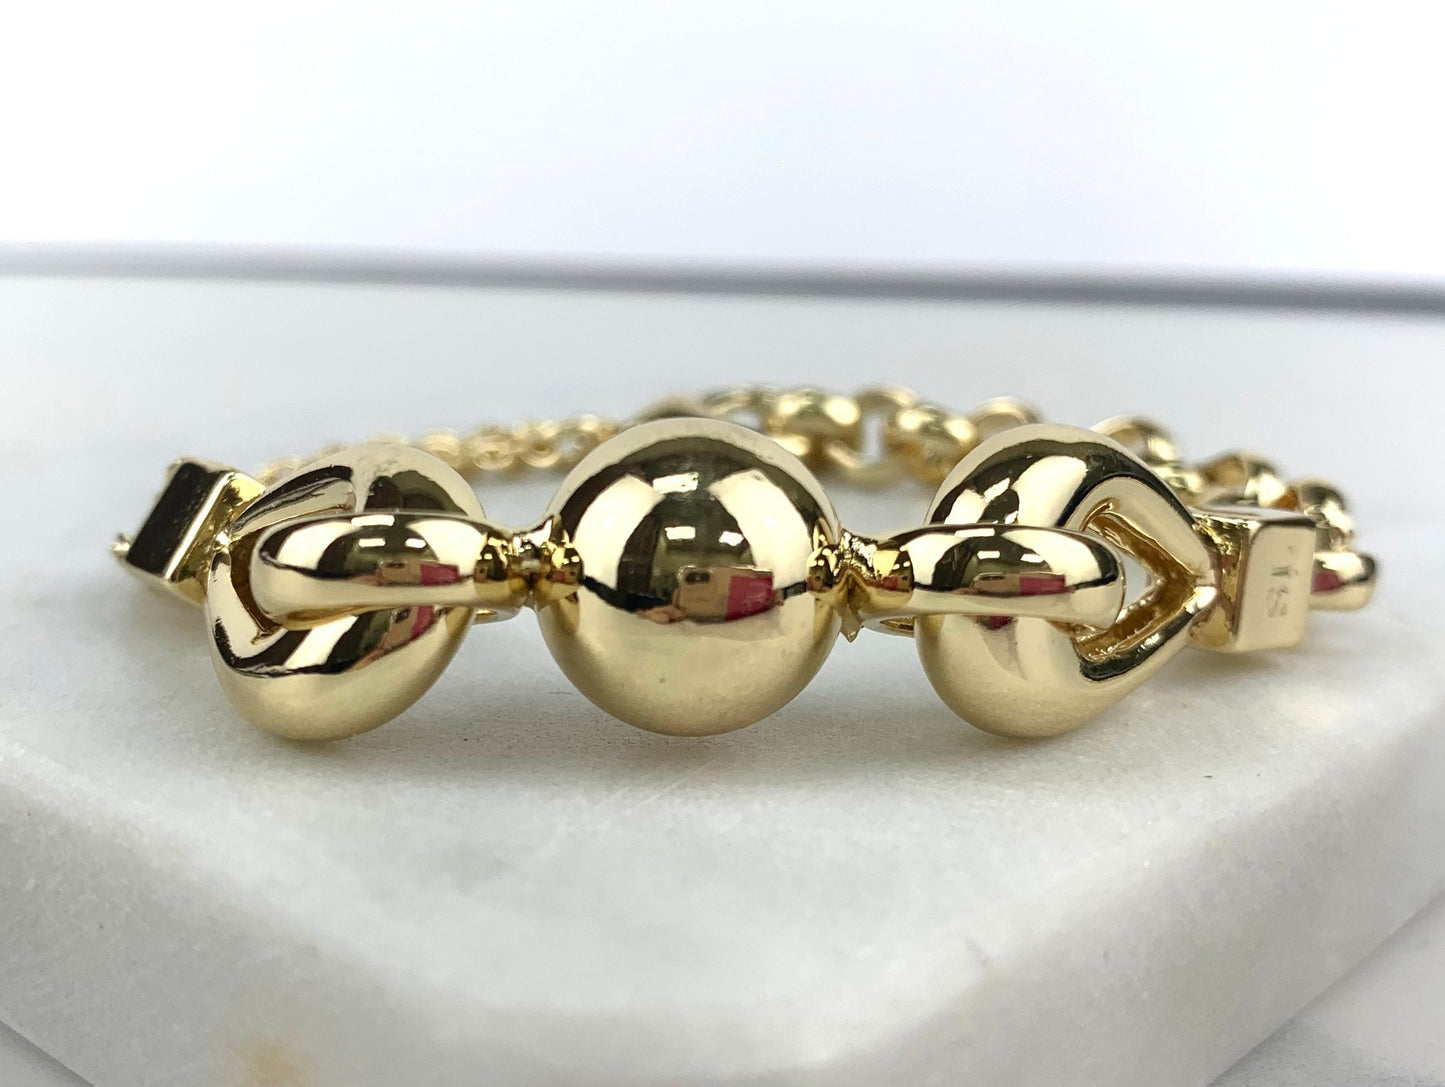 18k Gold Filled Linked Chain Bracelet Featuring Big Ball Design Detail Wholesale Jewelry Making Supplies